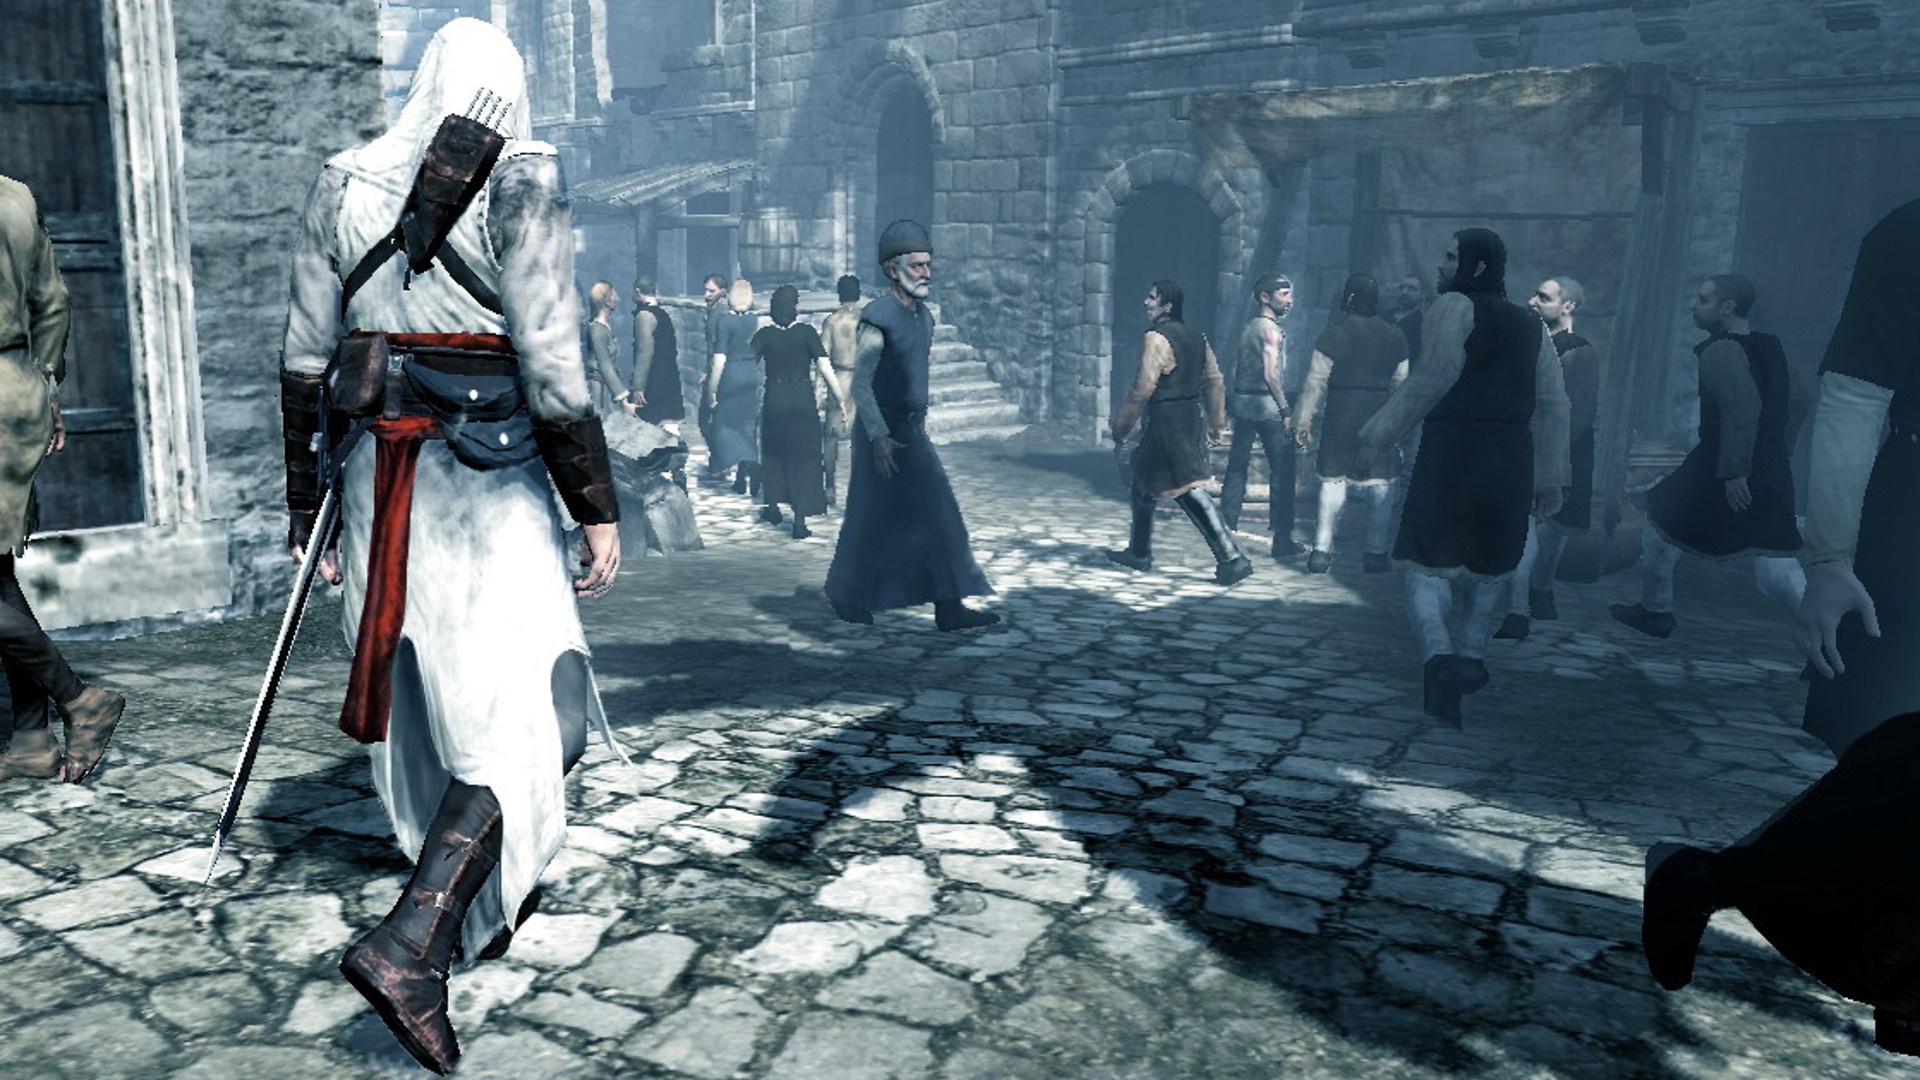 Assassin’s Creed’s rumored stealth spin-off is a chance to return to crowd-blending fundamentals